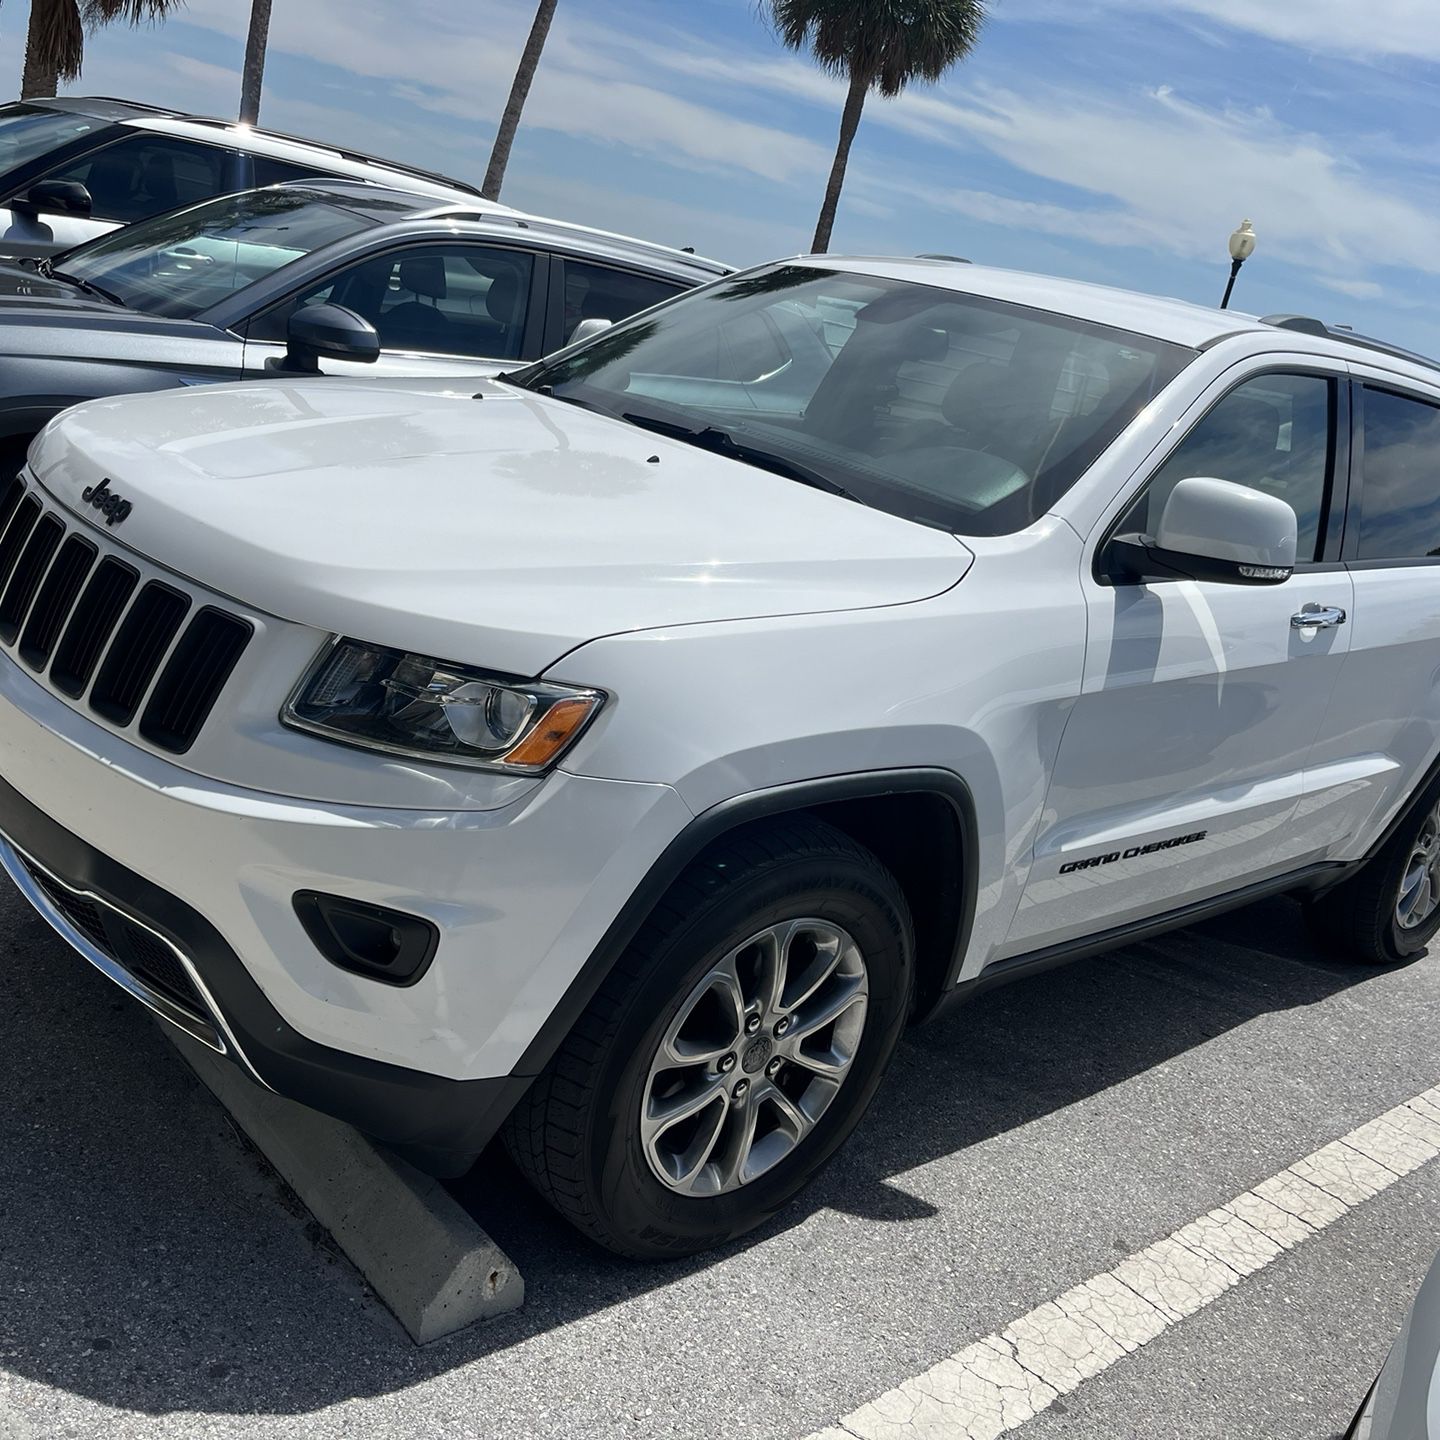 2014 Jeep Grand Cherokee Limited 